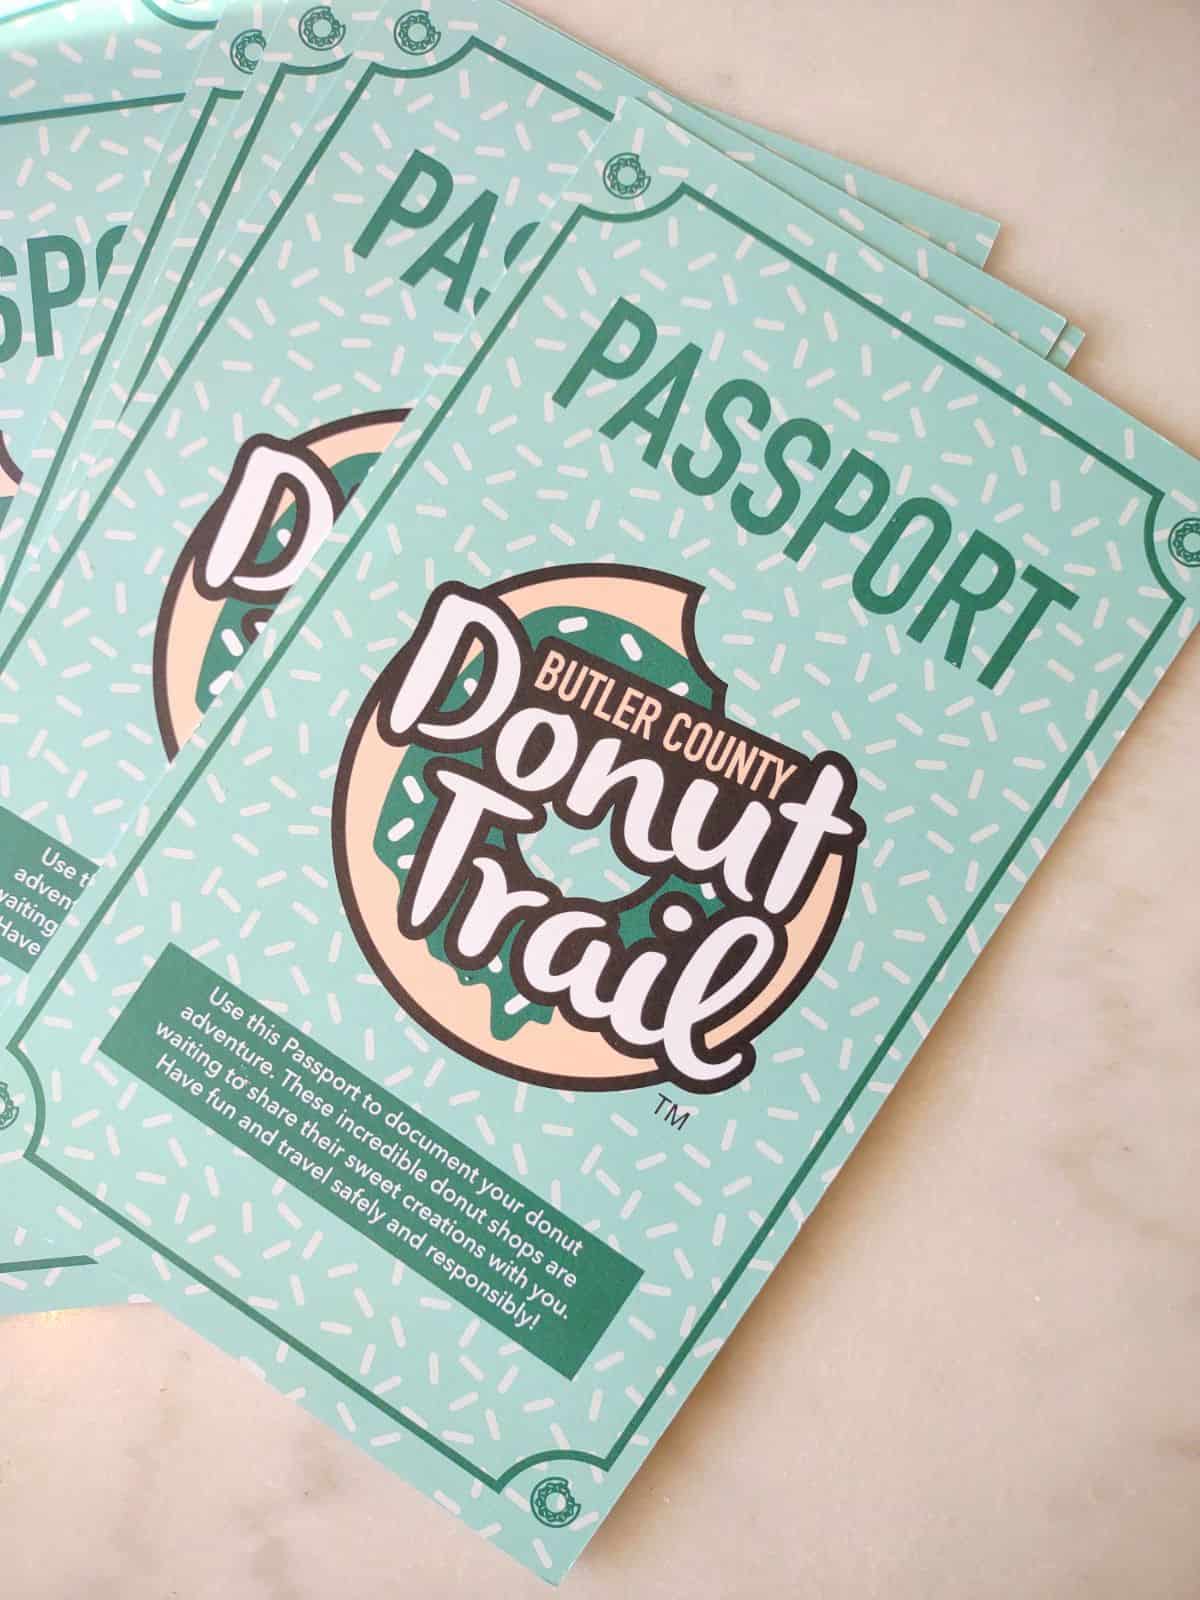 Butler County Donut Trail passports on a table.